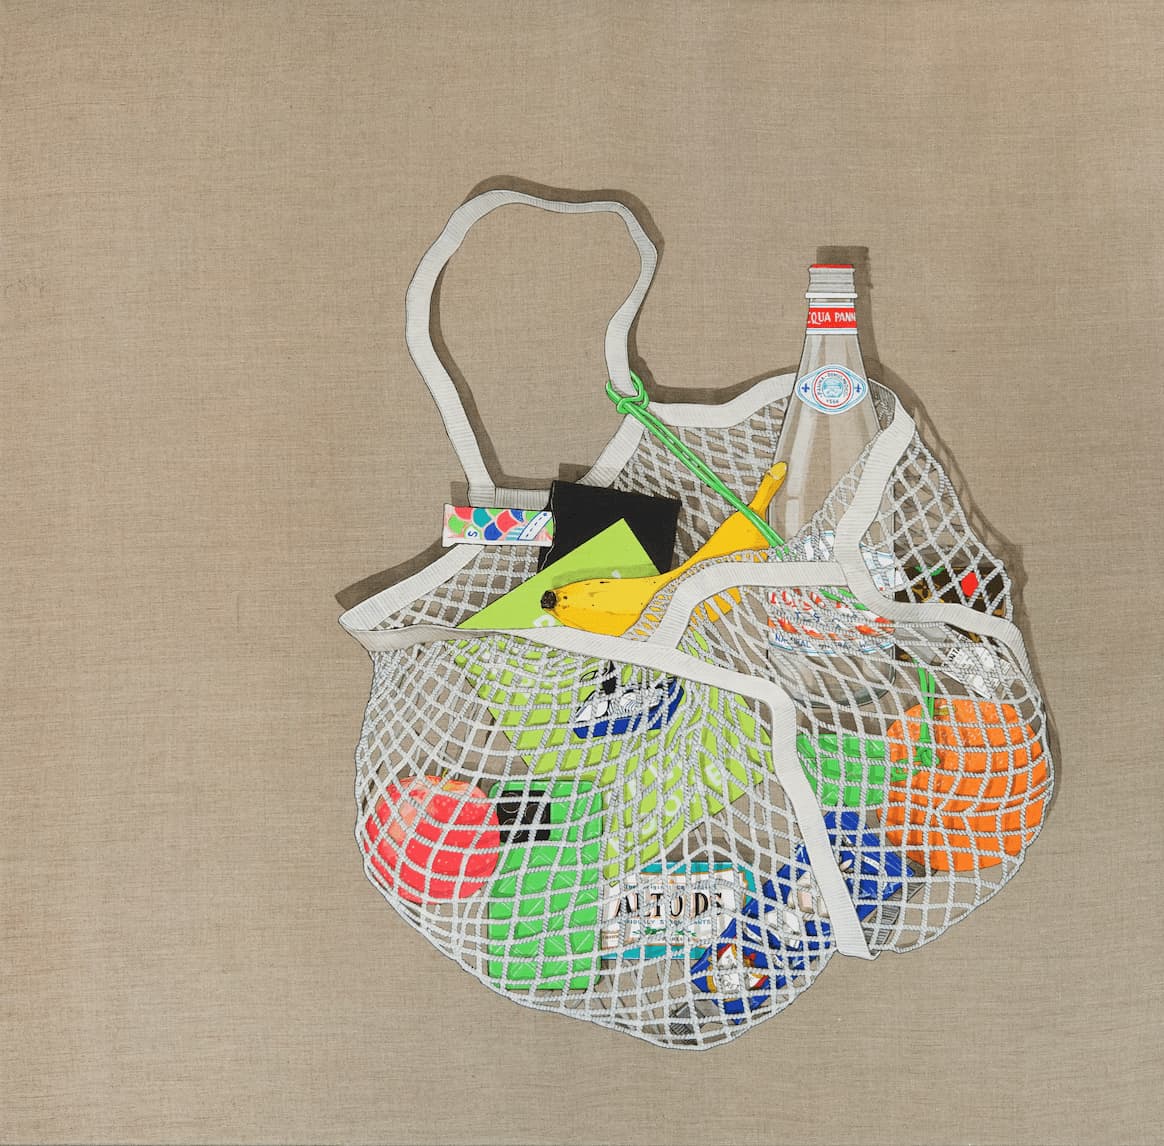 Sooyoung Chung In My Bag Acrylic on Linen